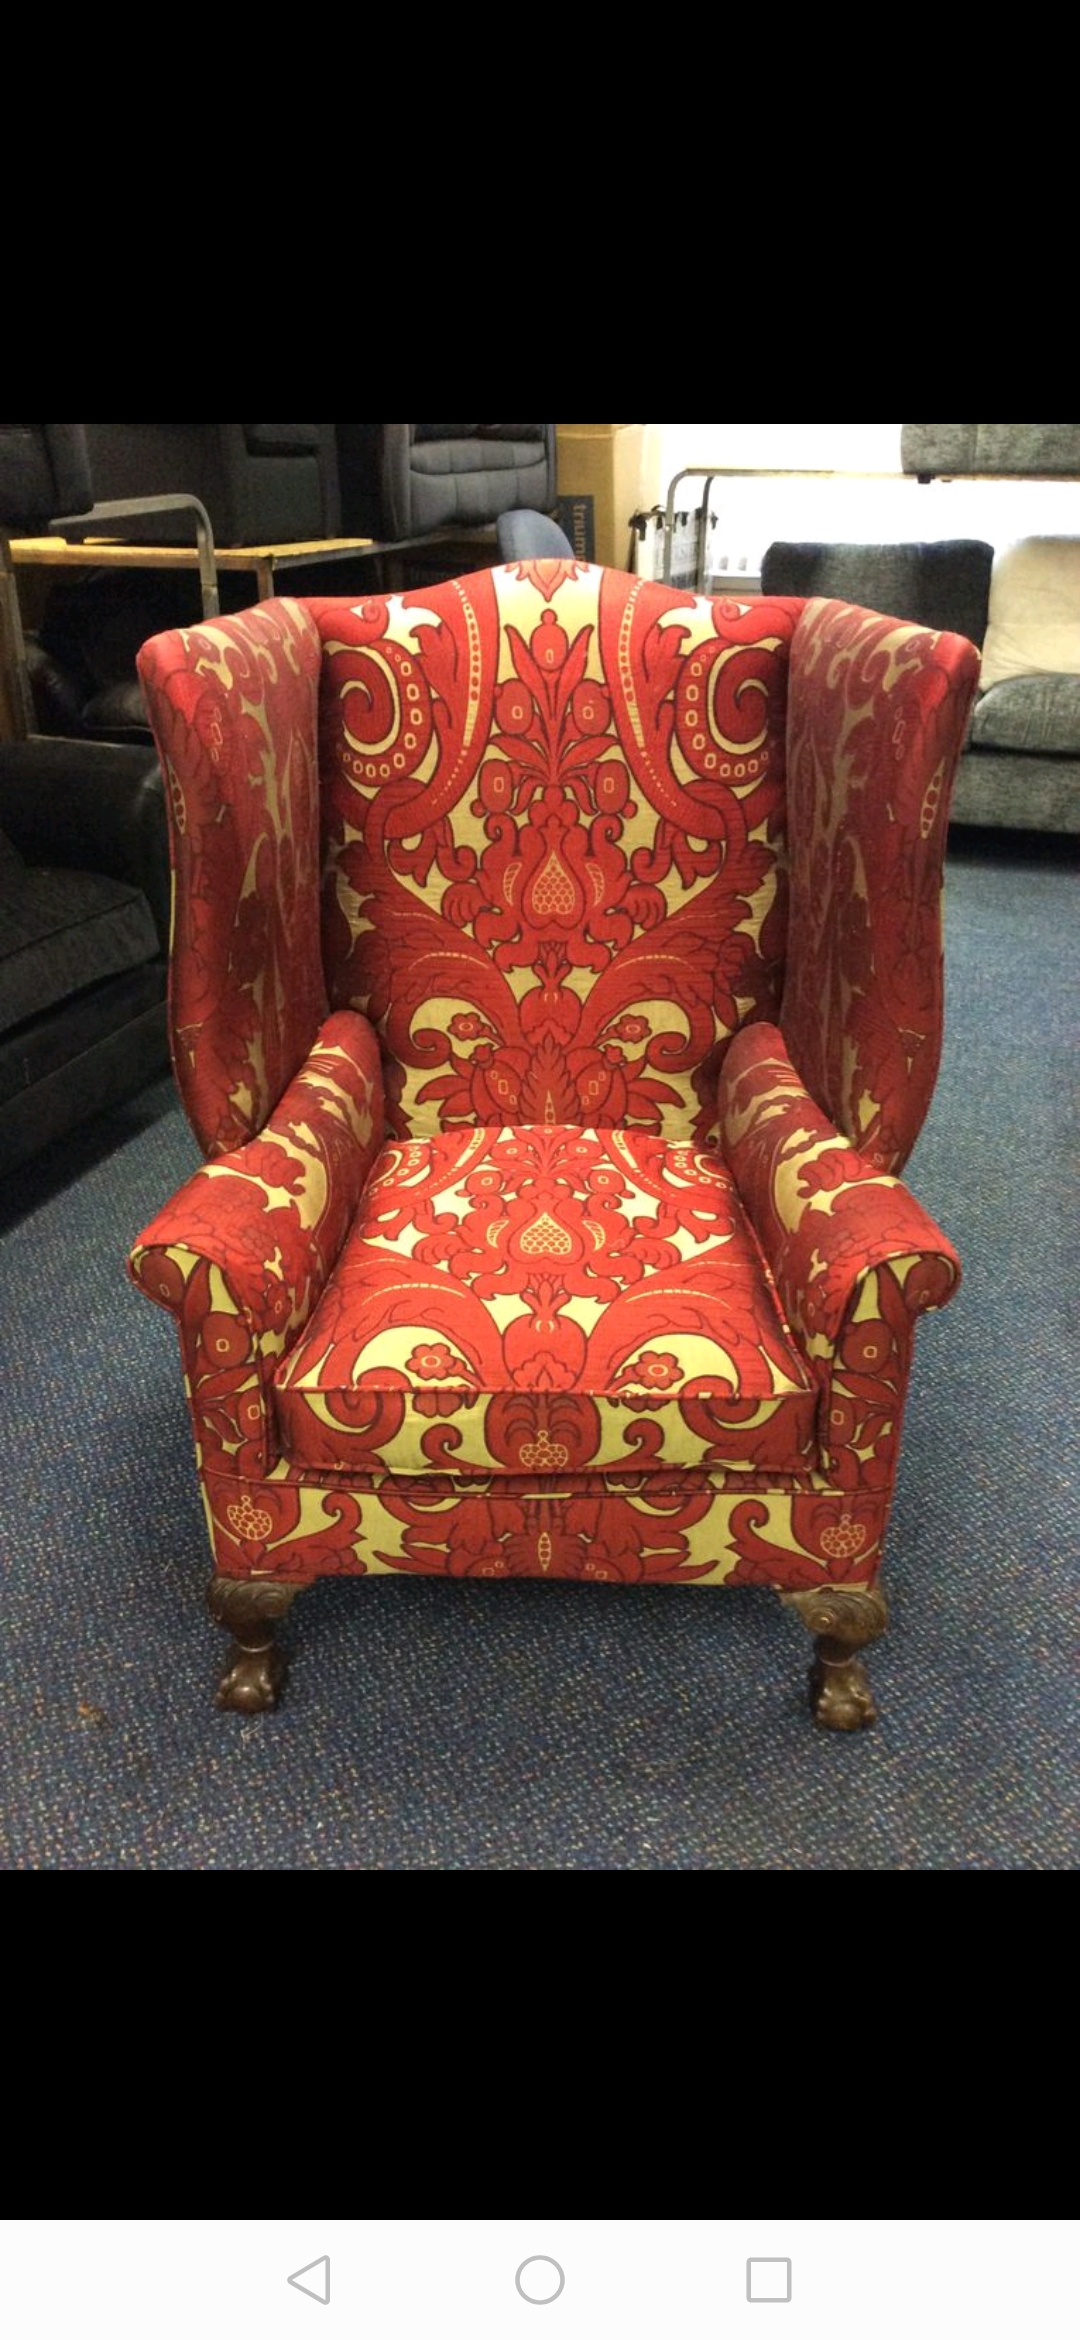 A1 Unique Upholstery - Upholstery 5